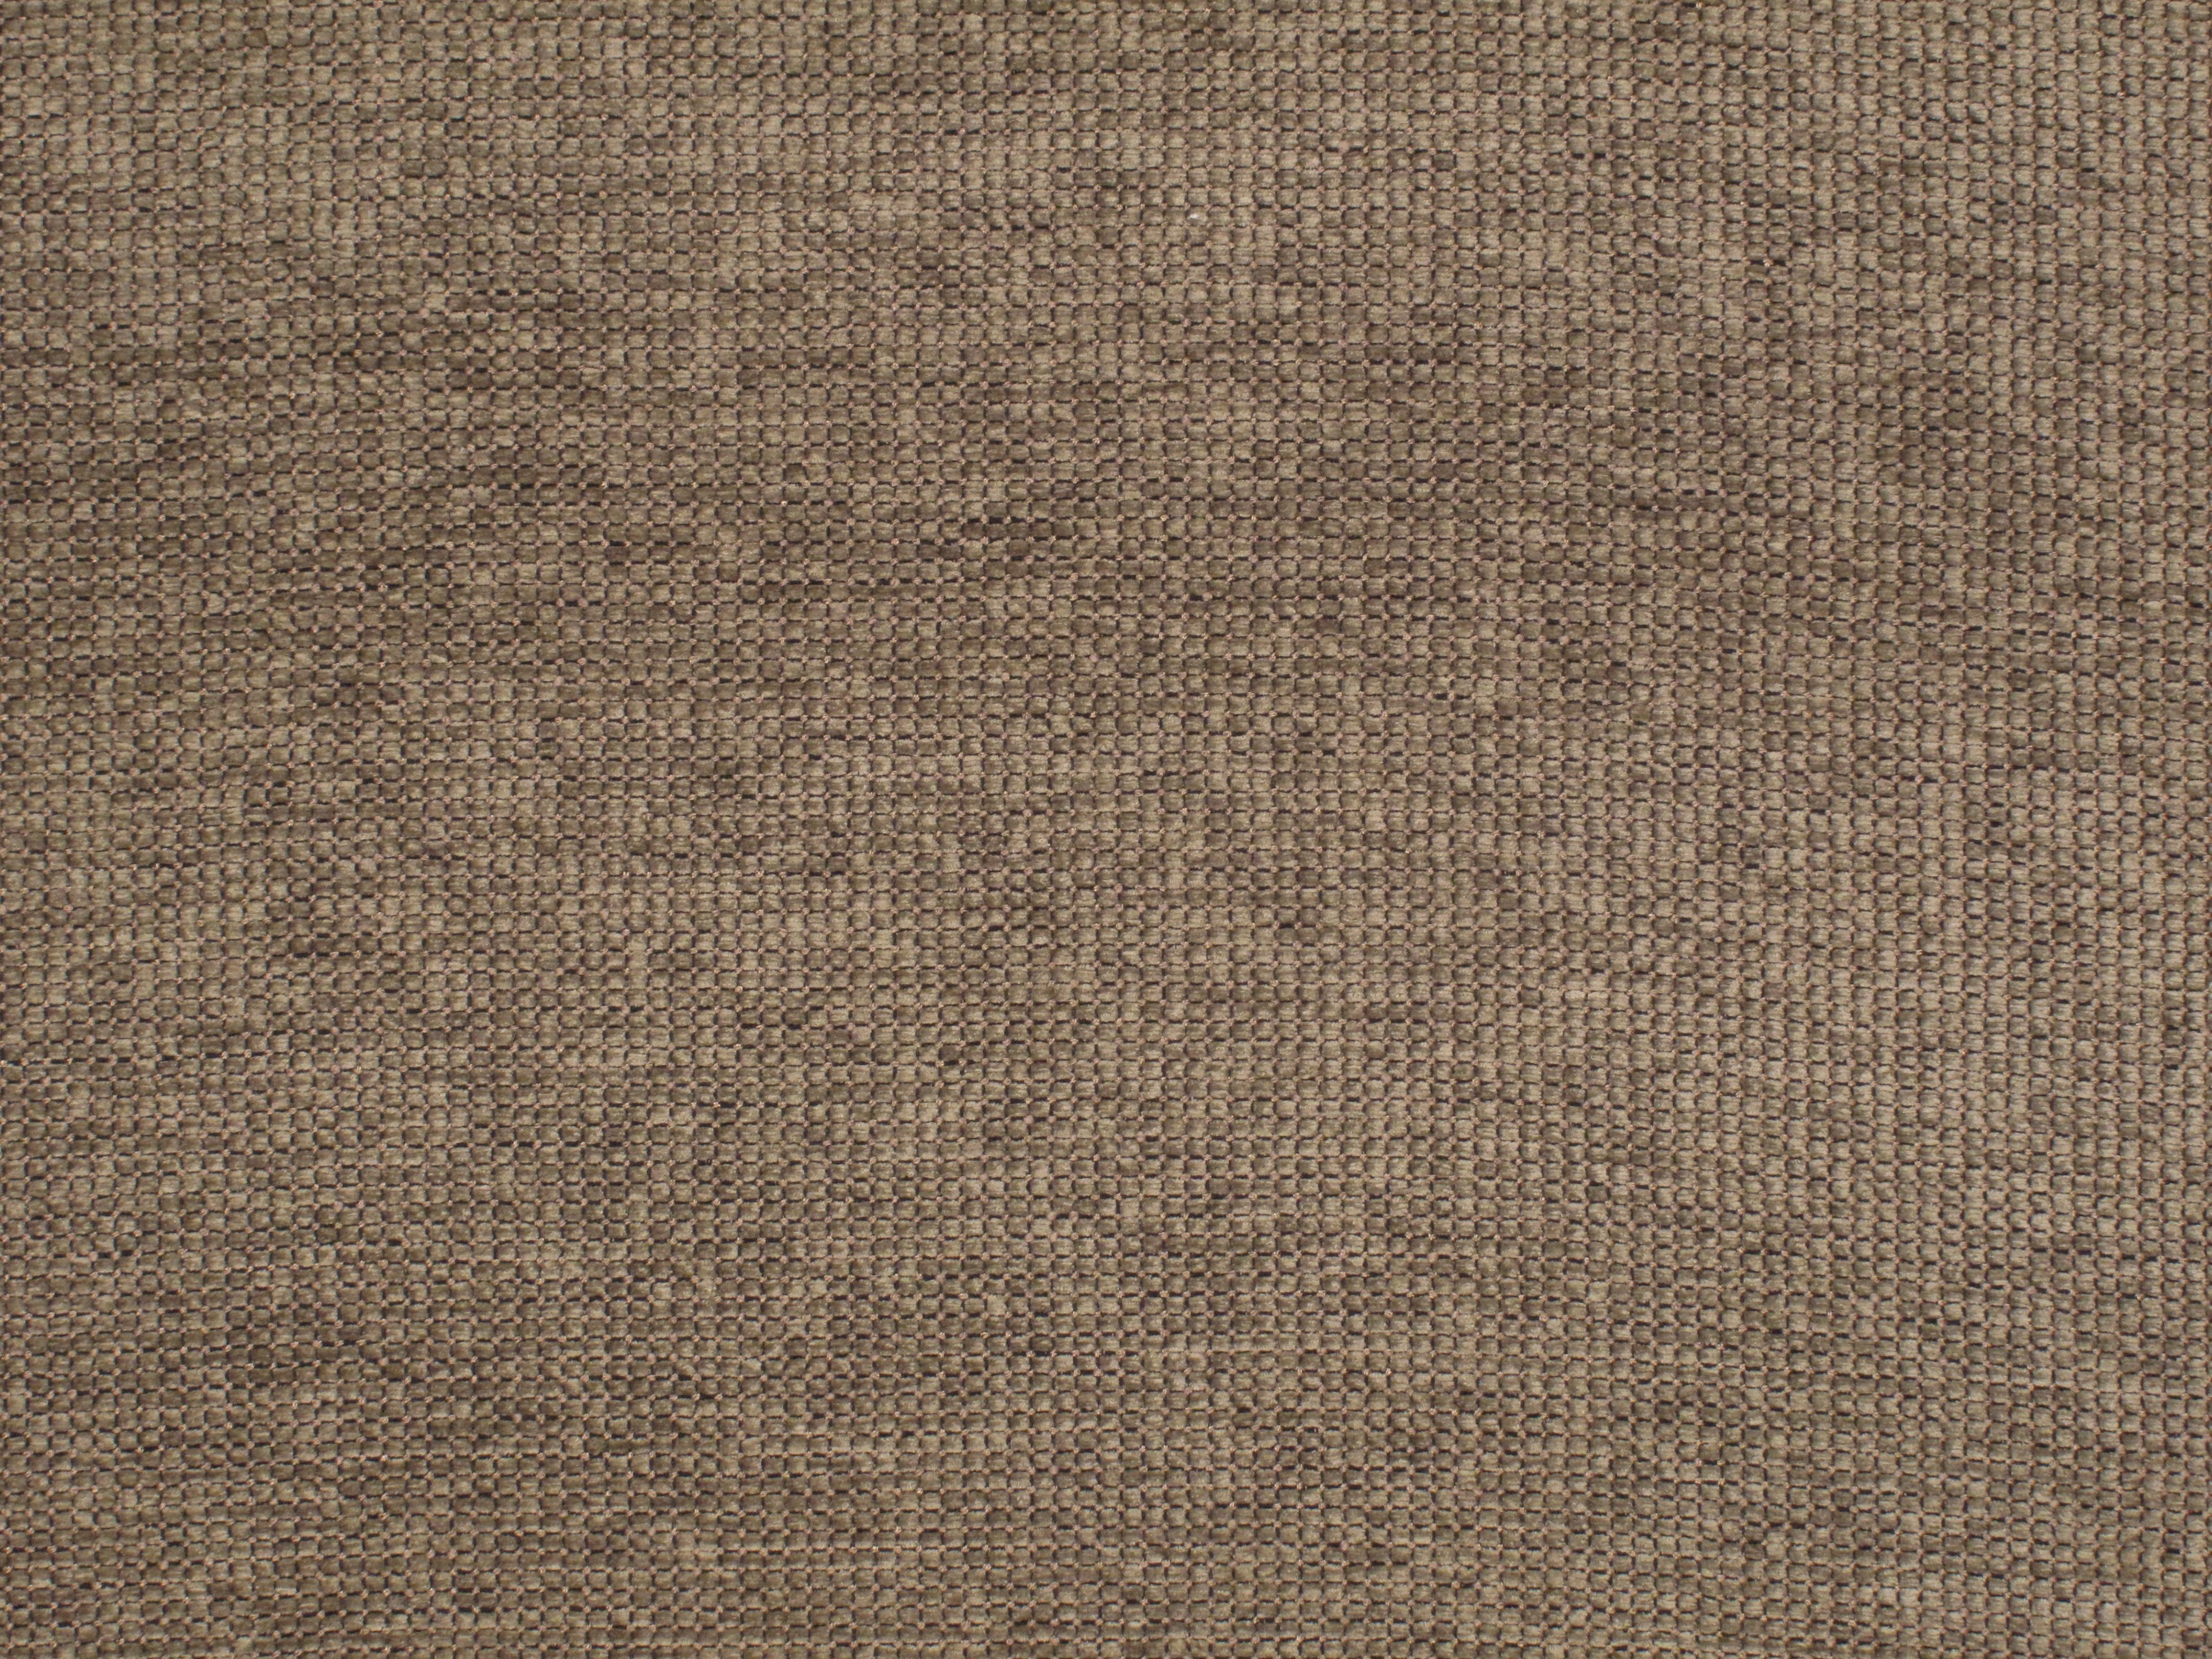 Cubic fabric in oregano mud color - pattern number PW 00190093 - by Scalamandre in the Old World Weavers collection